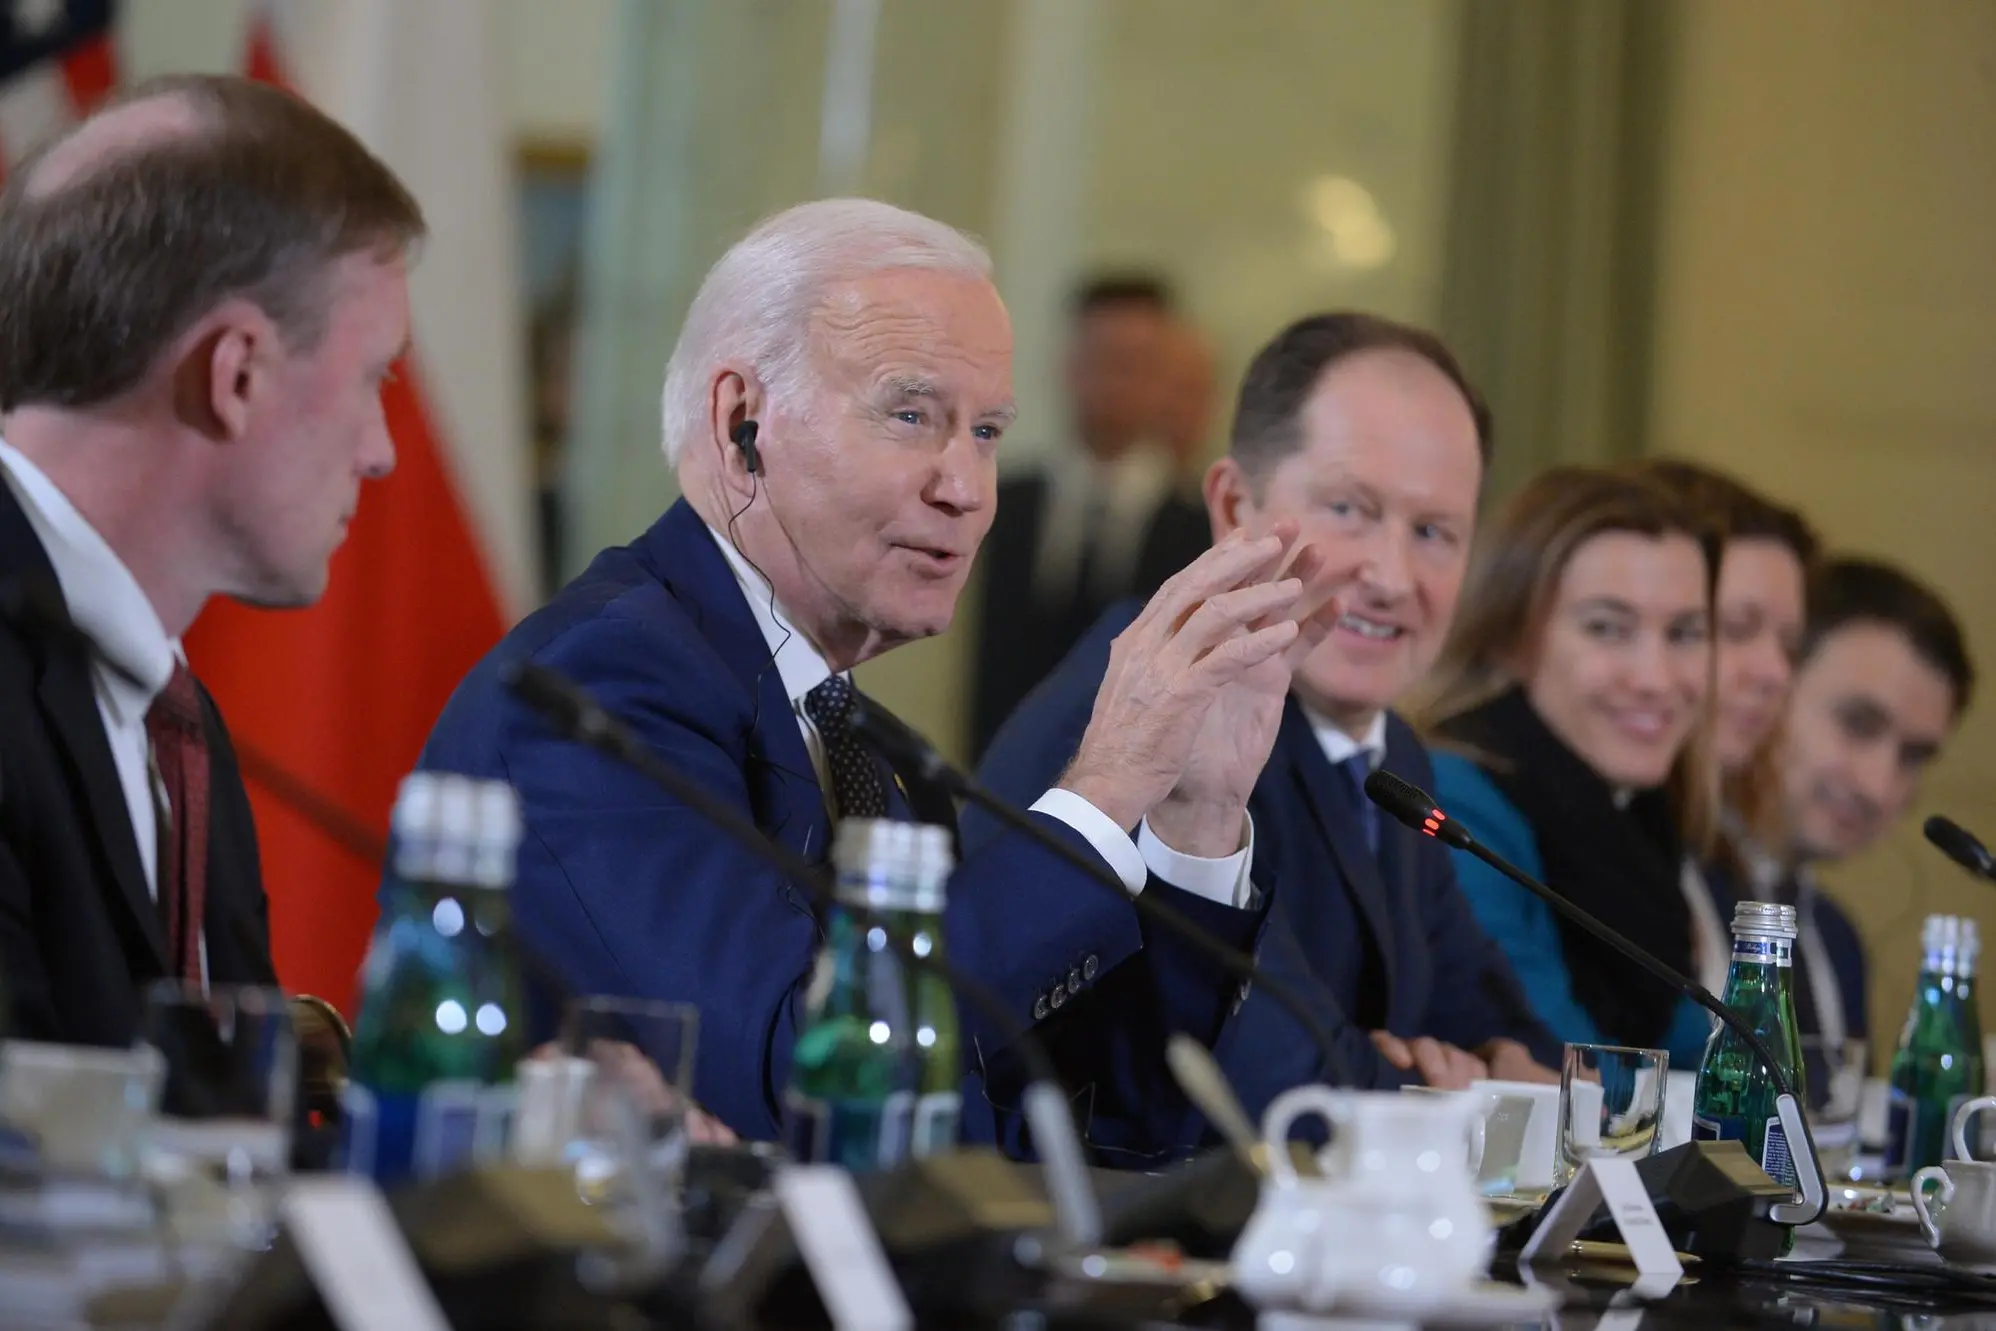 epa10481744 US president Joe Biden (2L) during his meeting with Polish President Andrzej Duda at the Presidential Palace in Warsaw, Poland, 21 February 2023. US president Joe Biden arrived in Poland for a two-day visit. EPA/MARCIN OBARA POLAND OUT